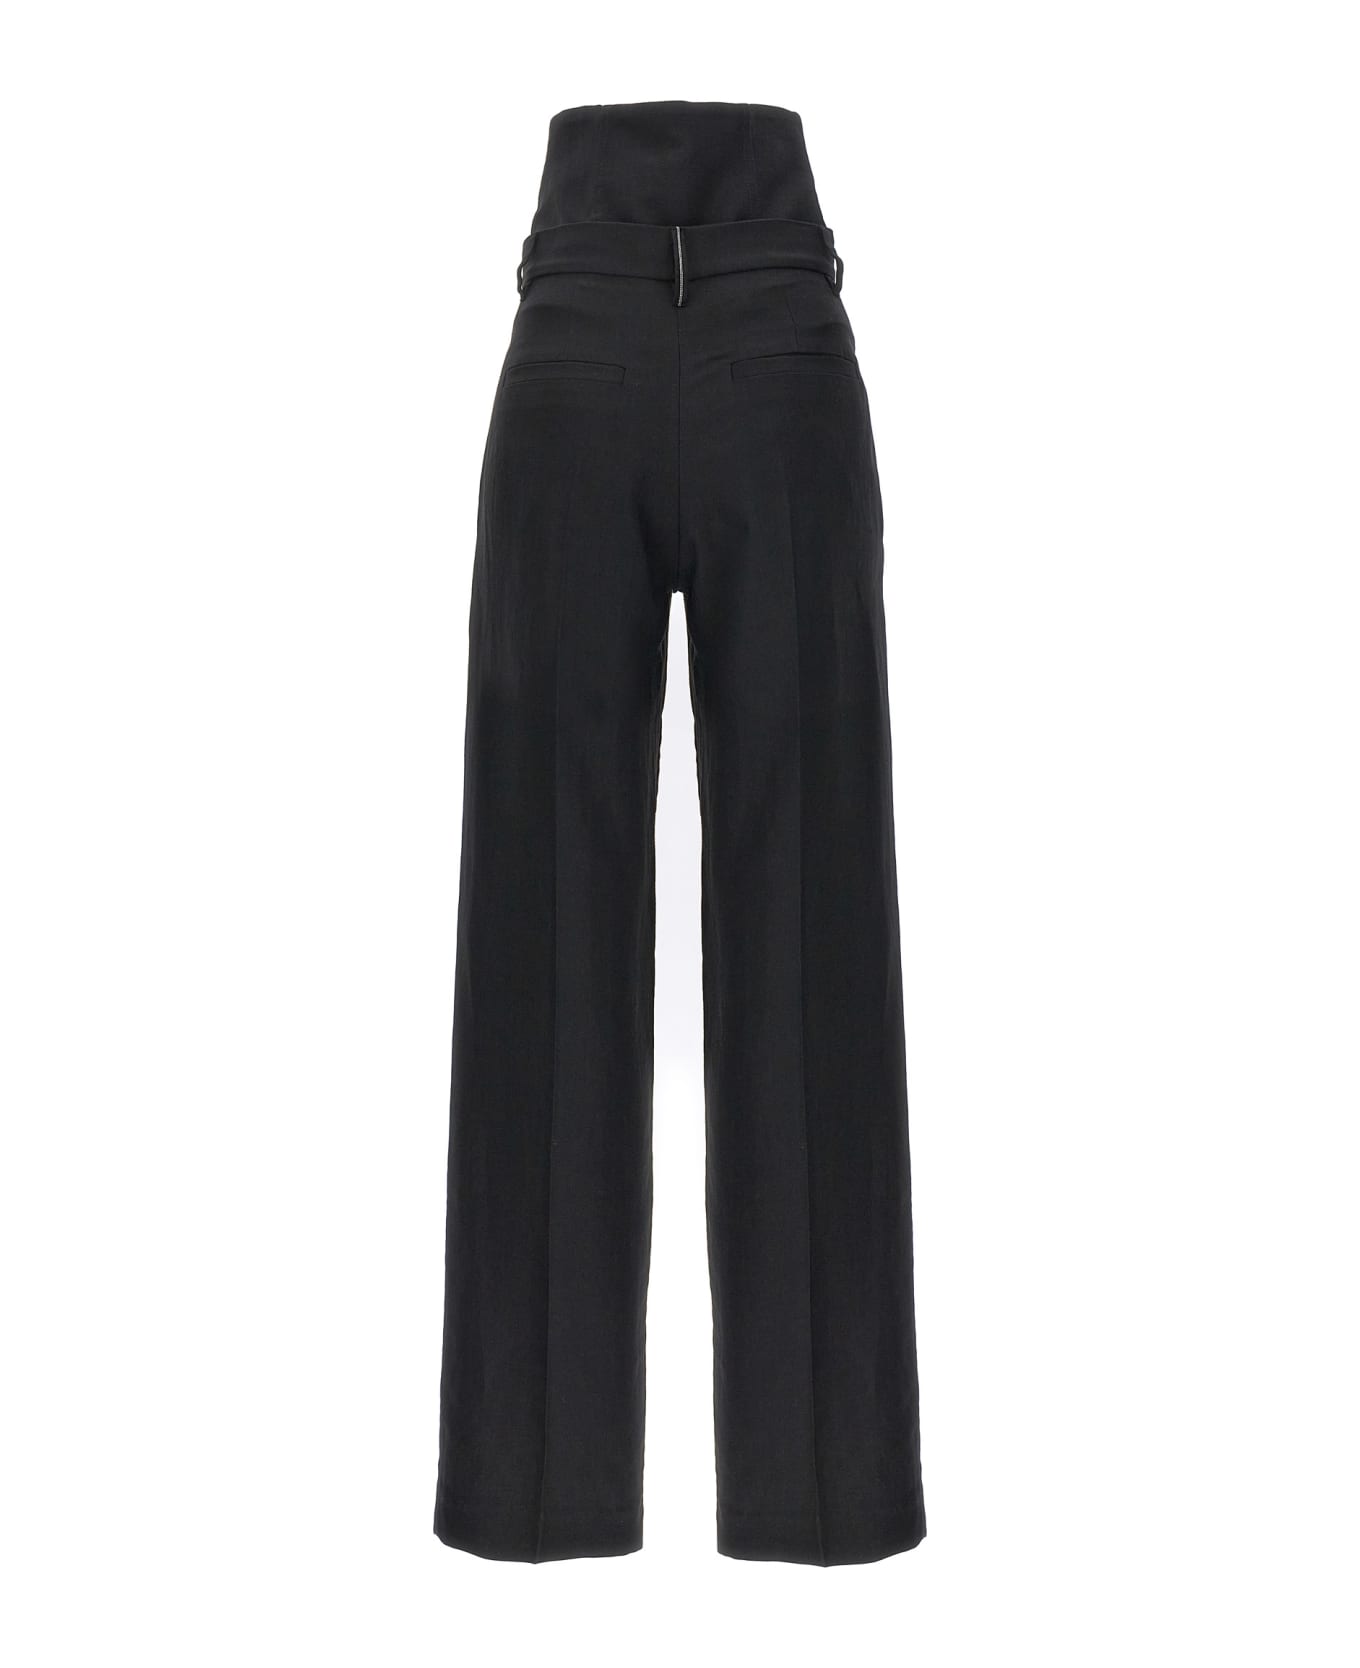 Brunello Cucinelli High Waisted Tailored Trousers - Black